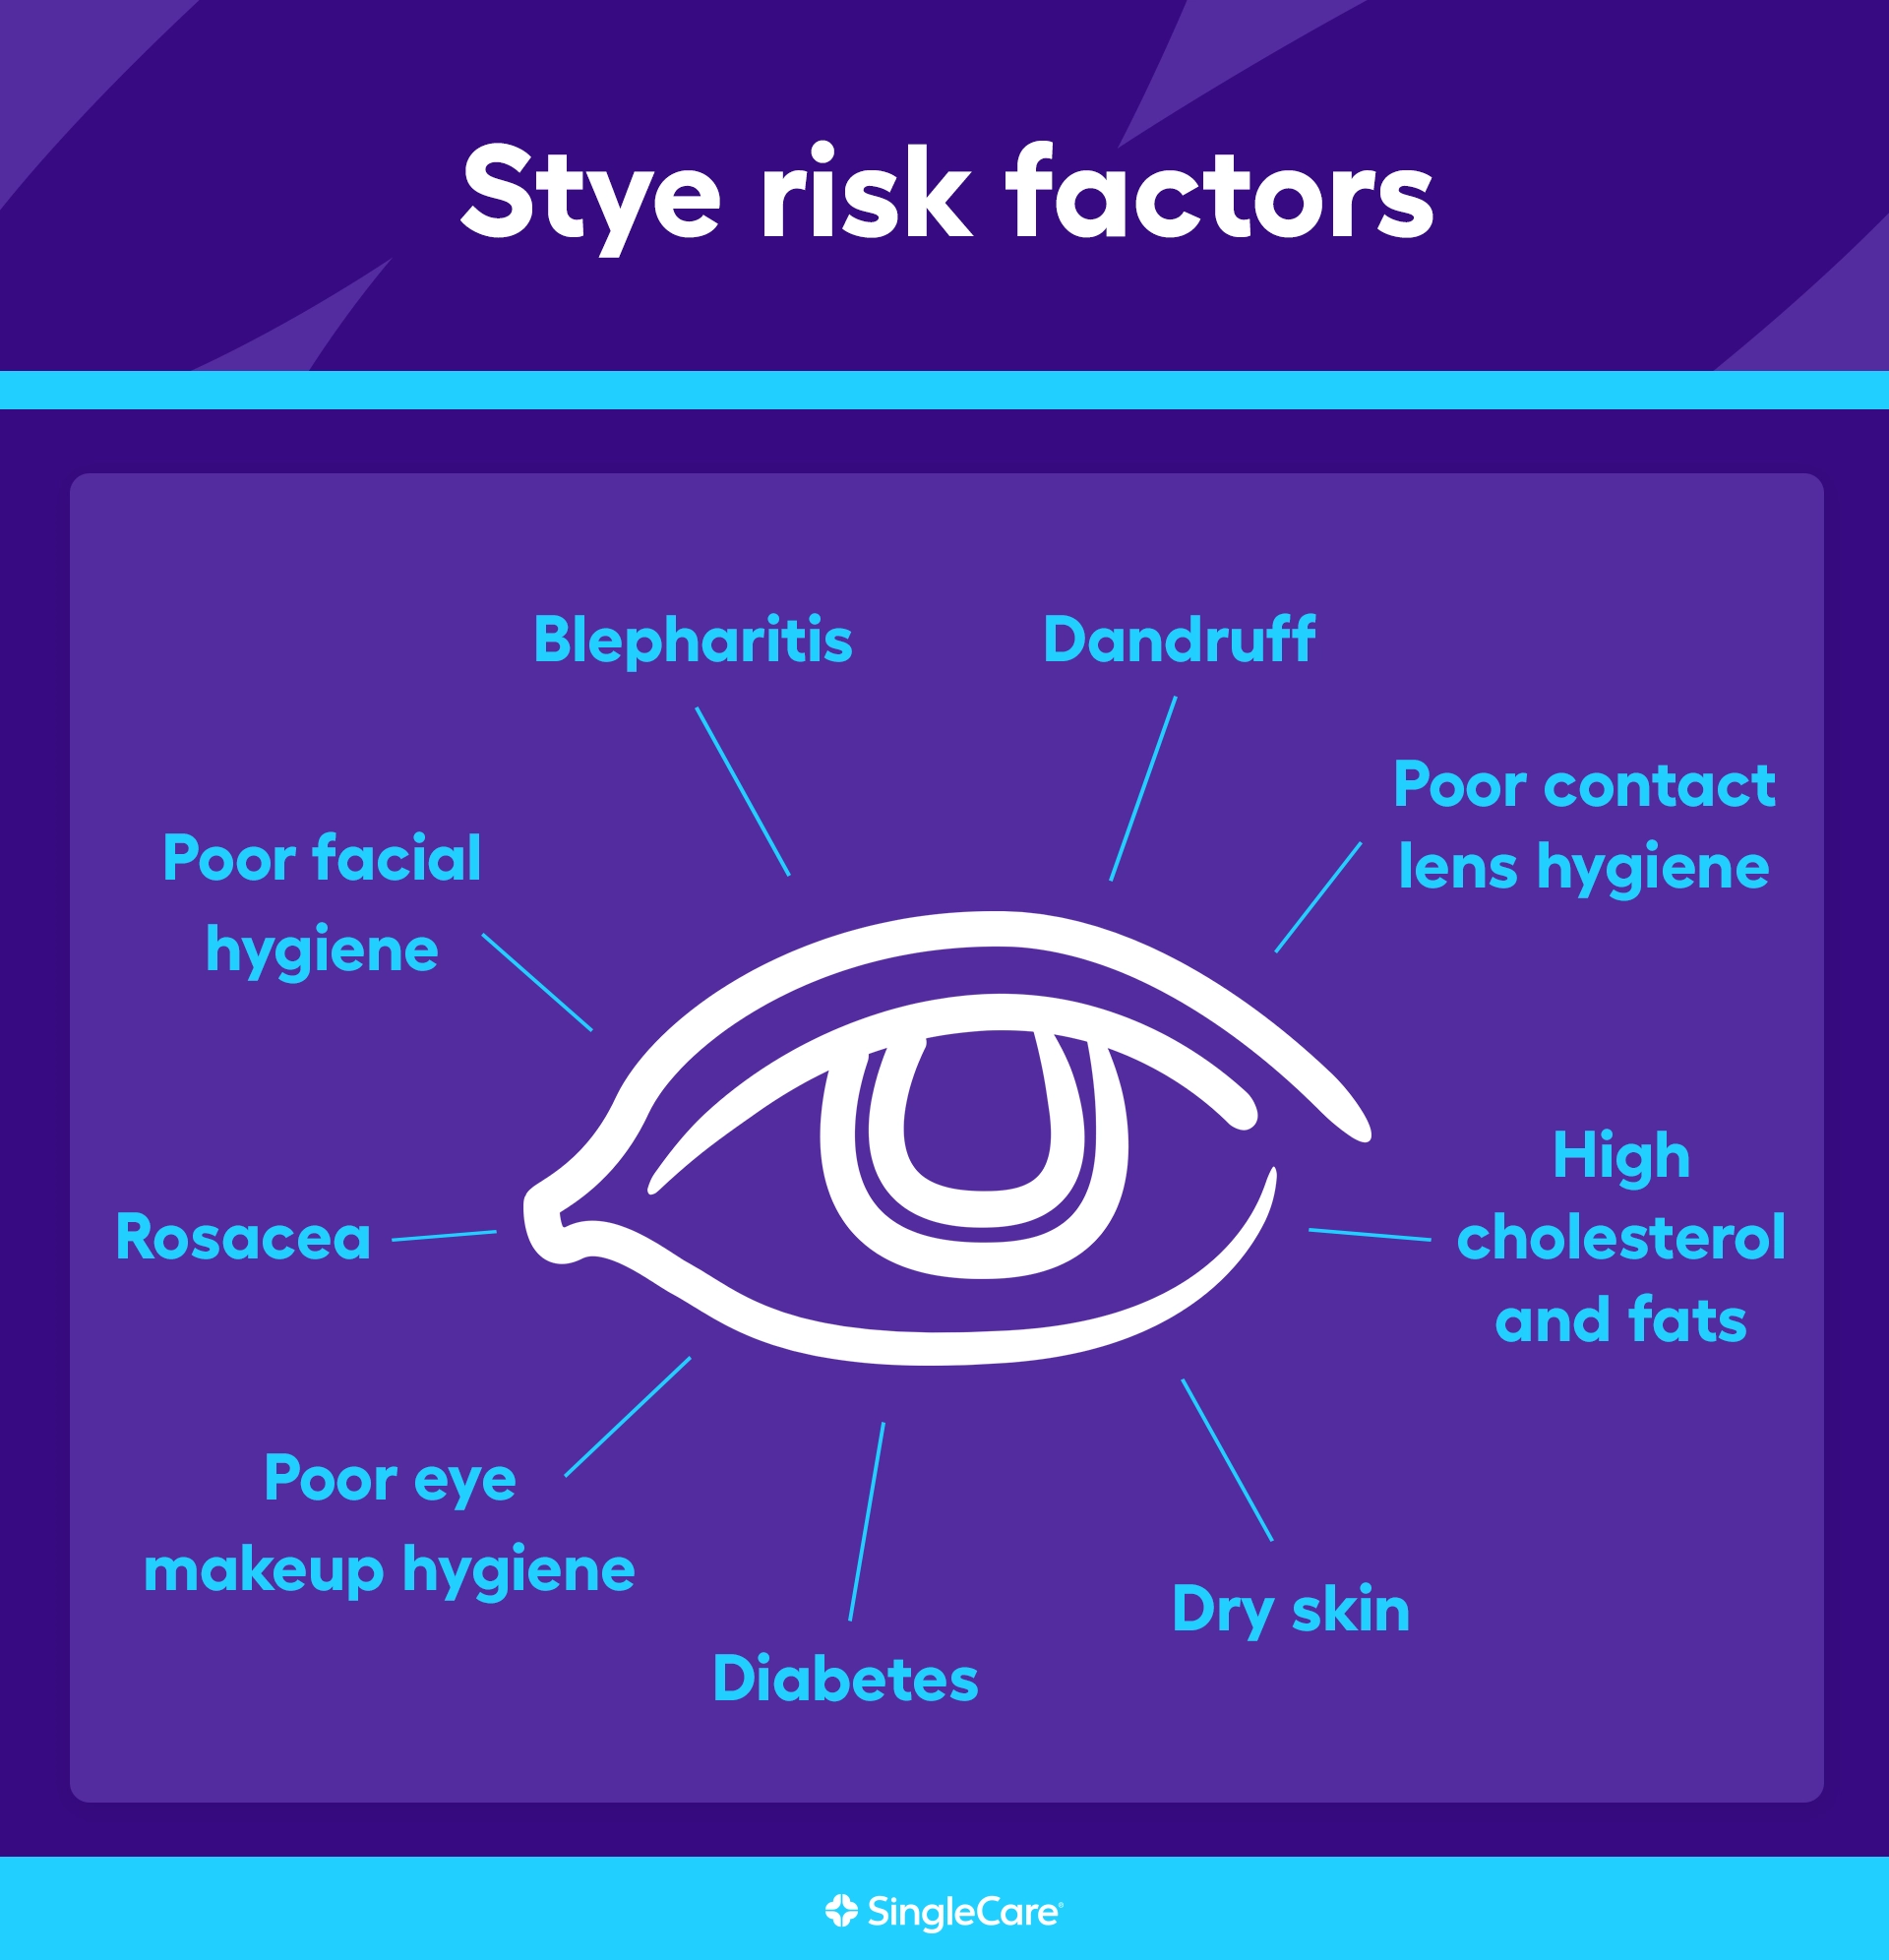 What are the risk factors for a stye?